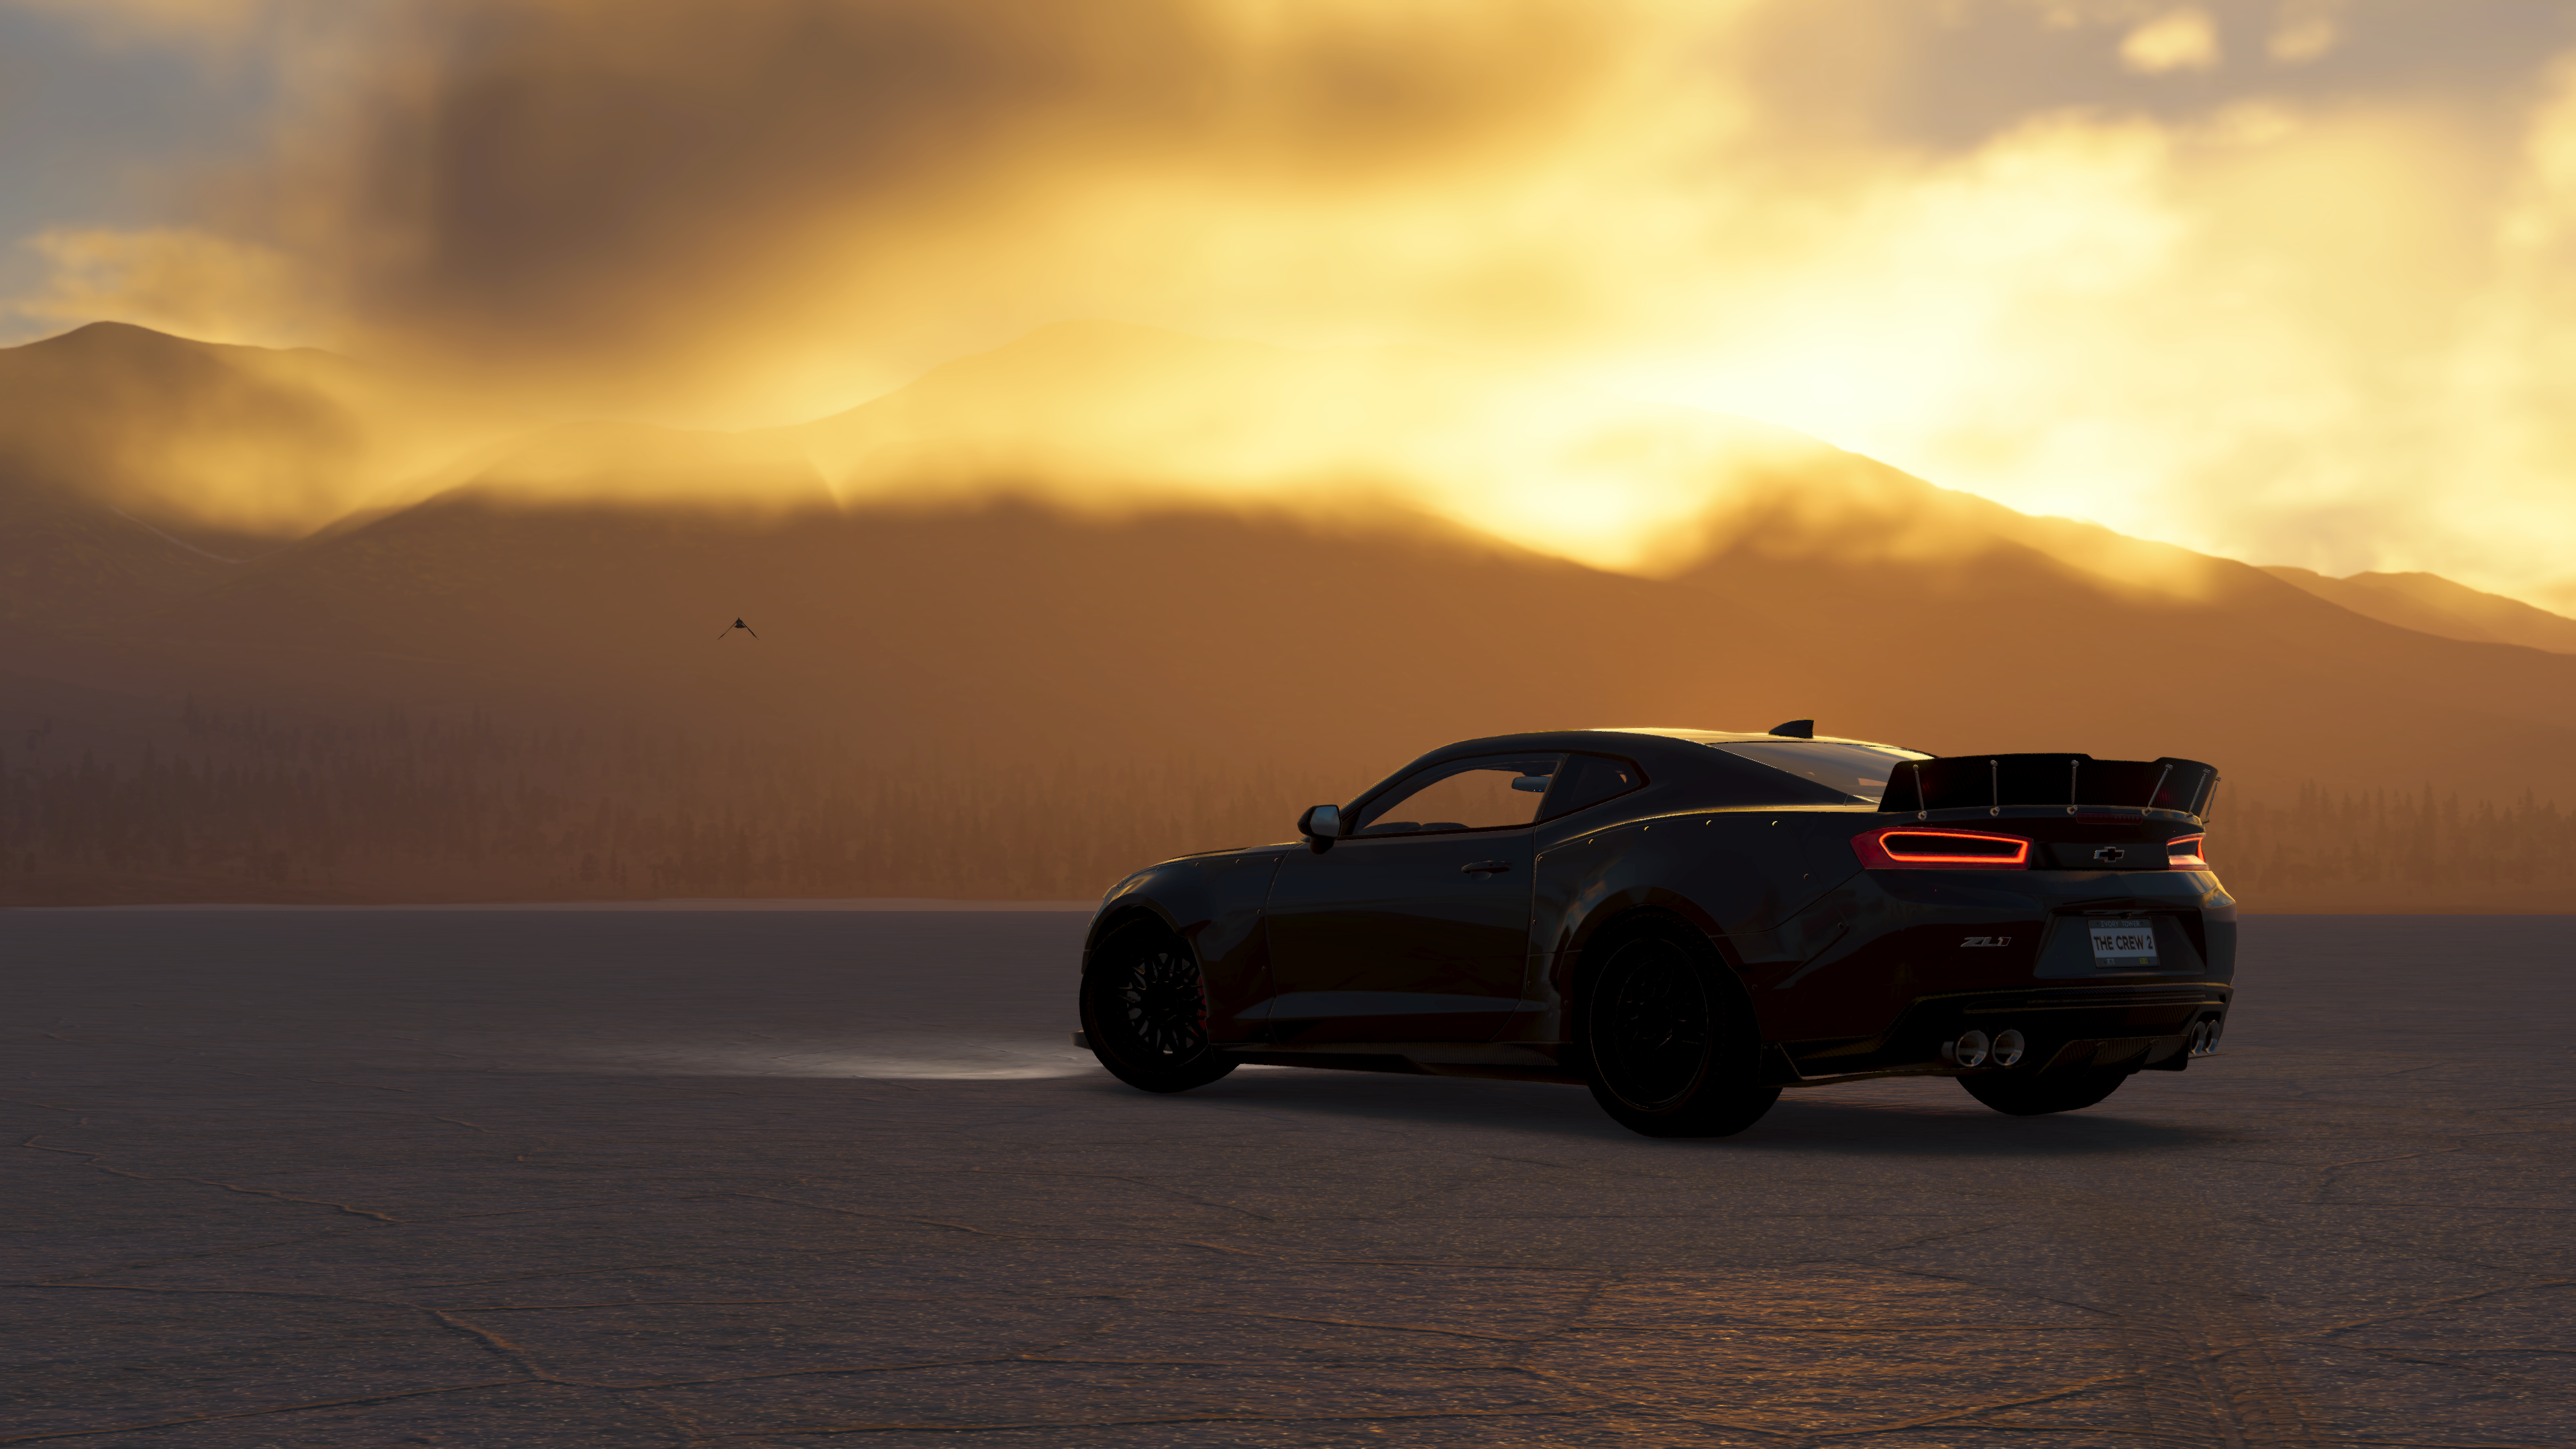 Car Landscape Mountains Evening Clouds Camaro Video Games The Crew 2 The Crew 3840x2160